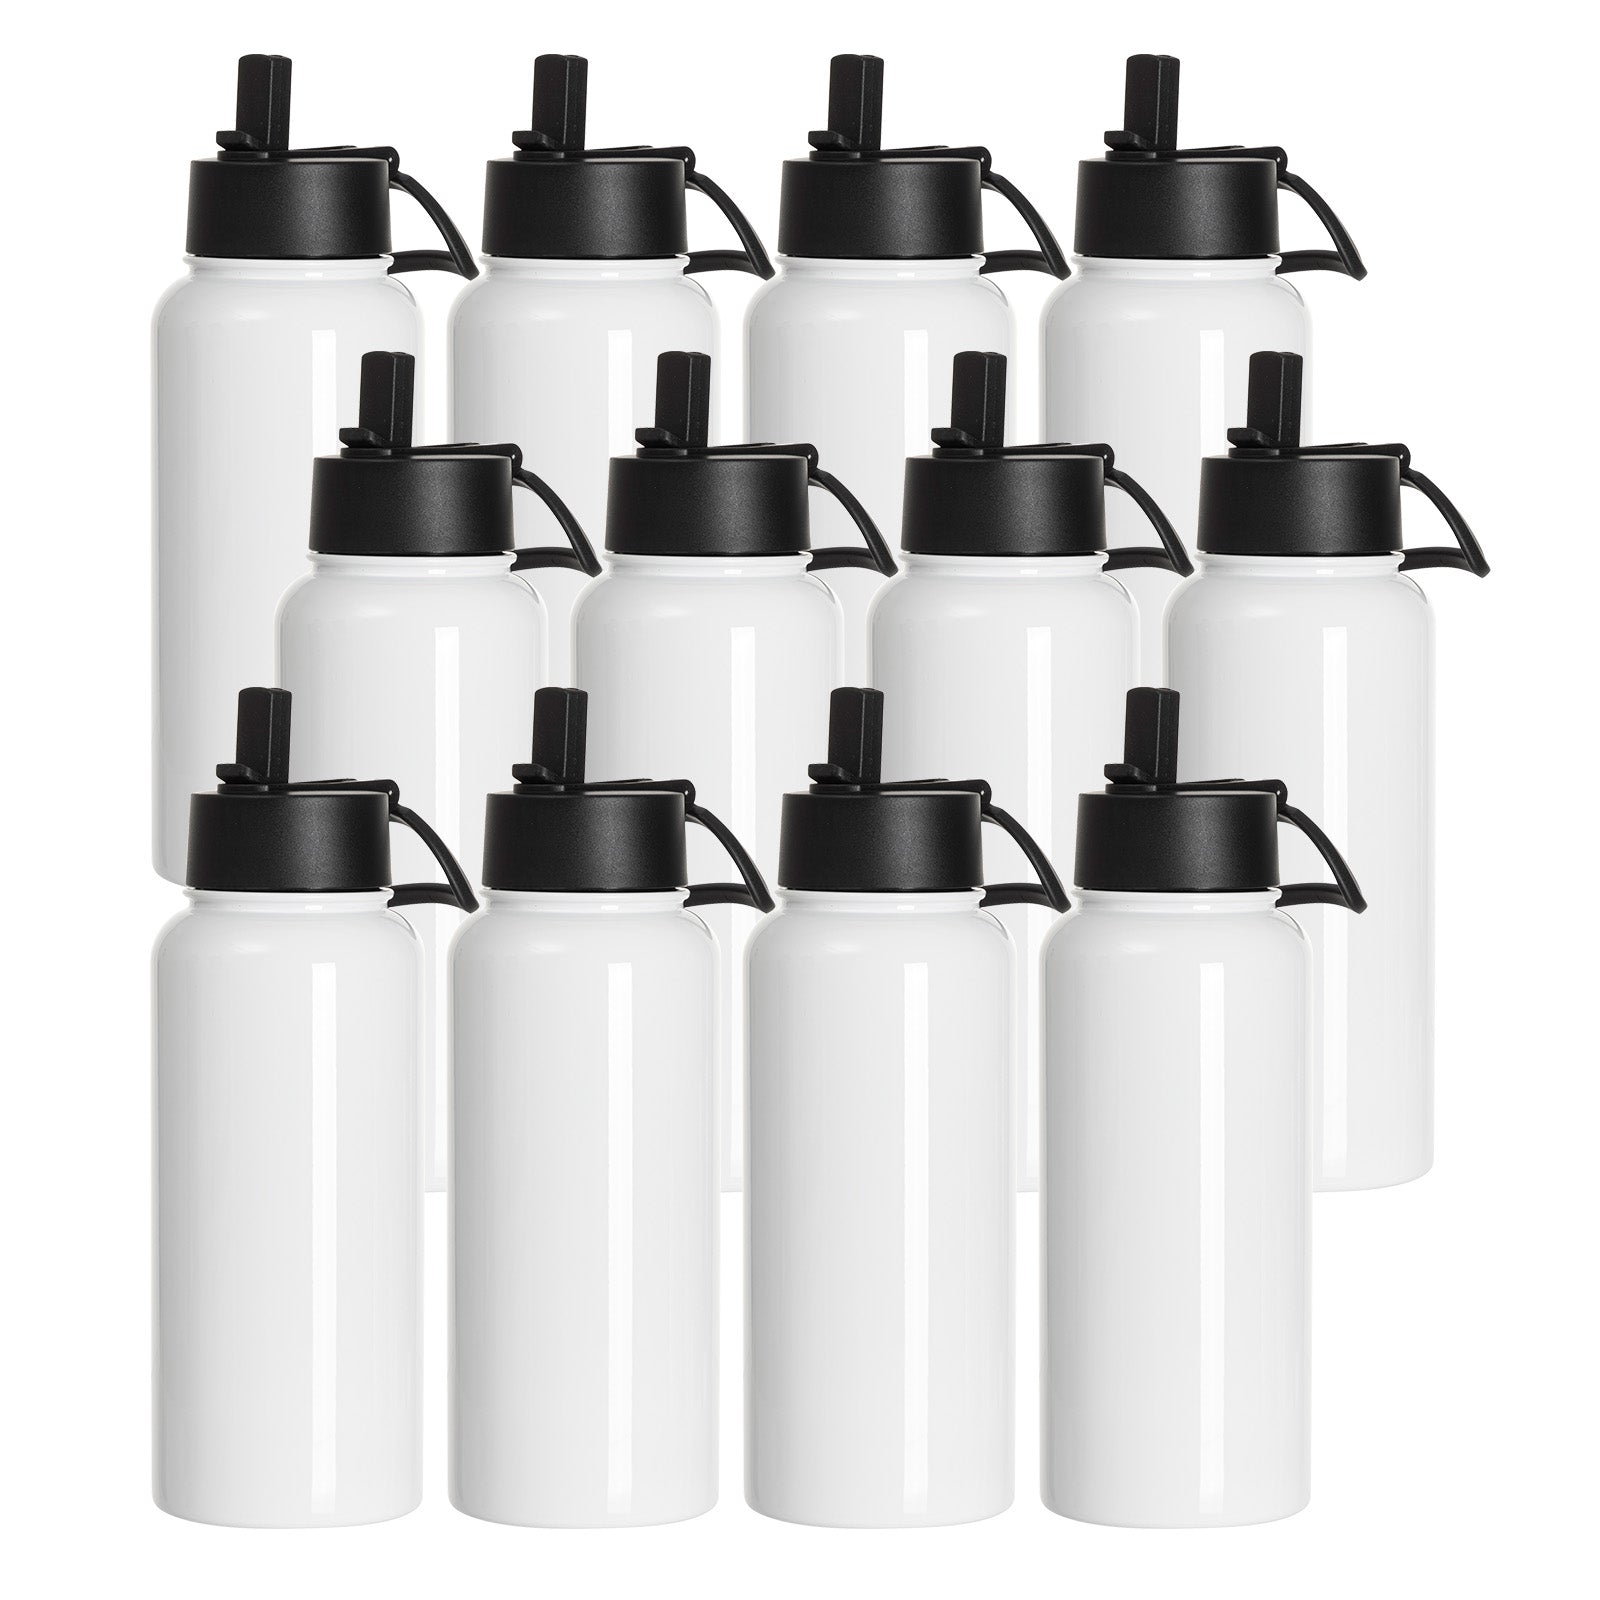 Sublimation Sports Water Bottles White With Wide Mouth Handle Cap And Straw  32 OZ 2 Pack